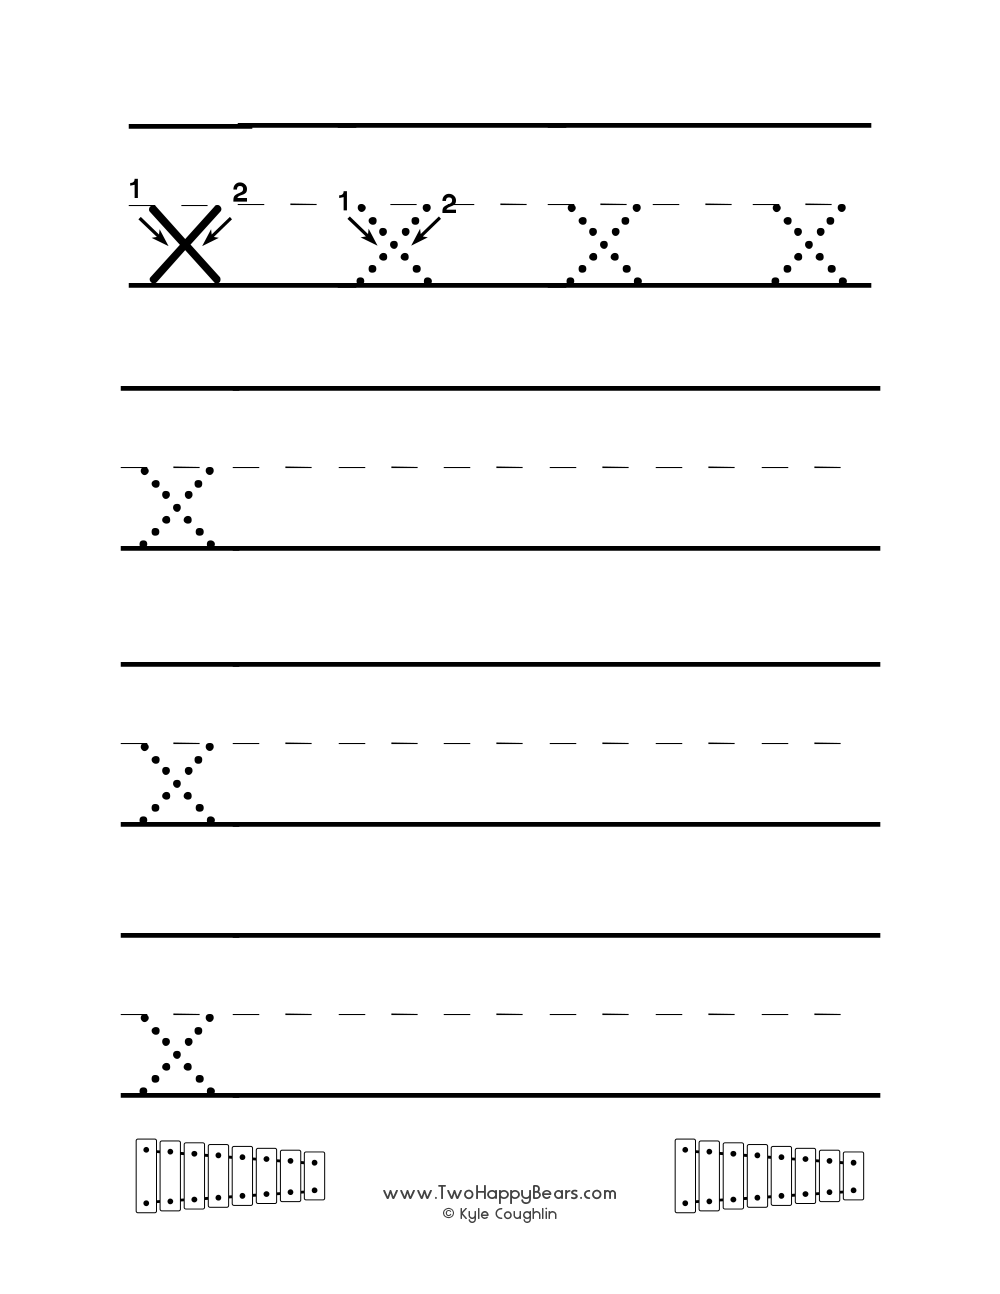 Worksheet for tracing and writing the lowercase letter X, in free printable PDF format.